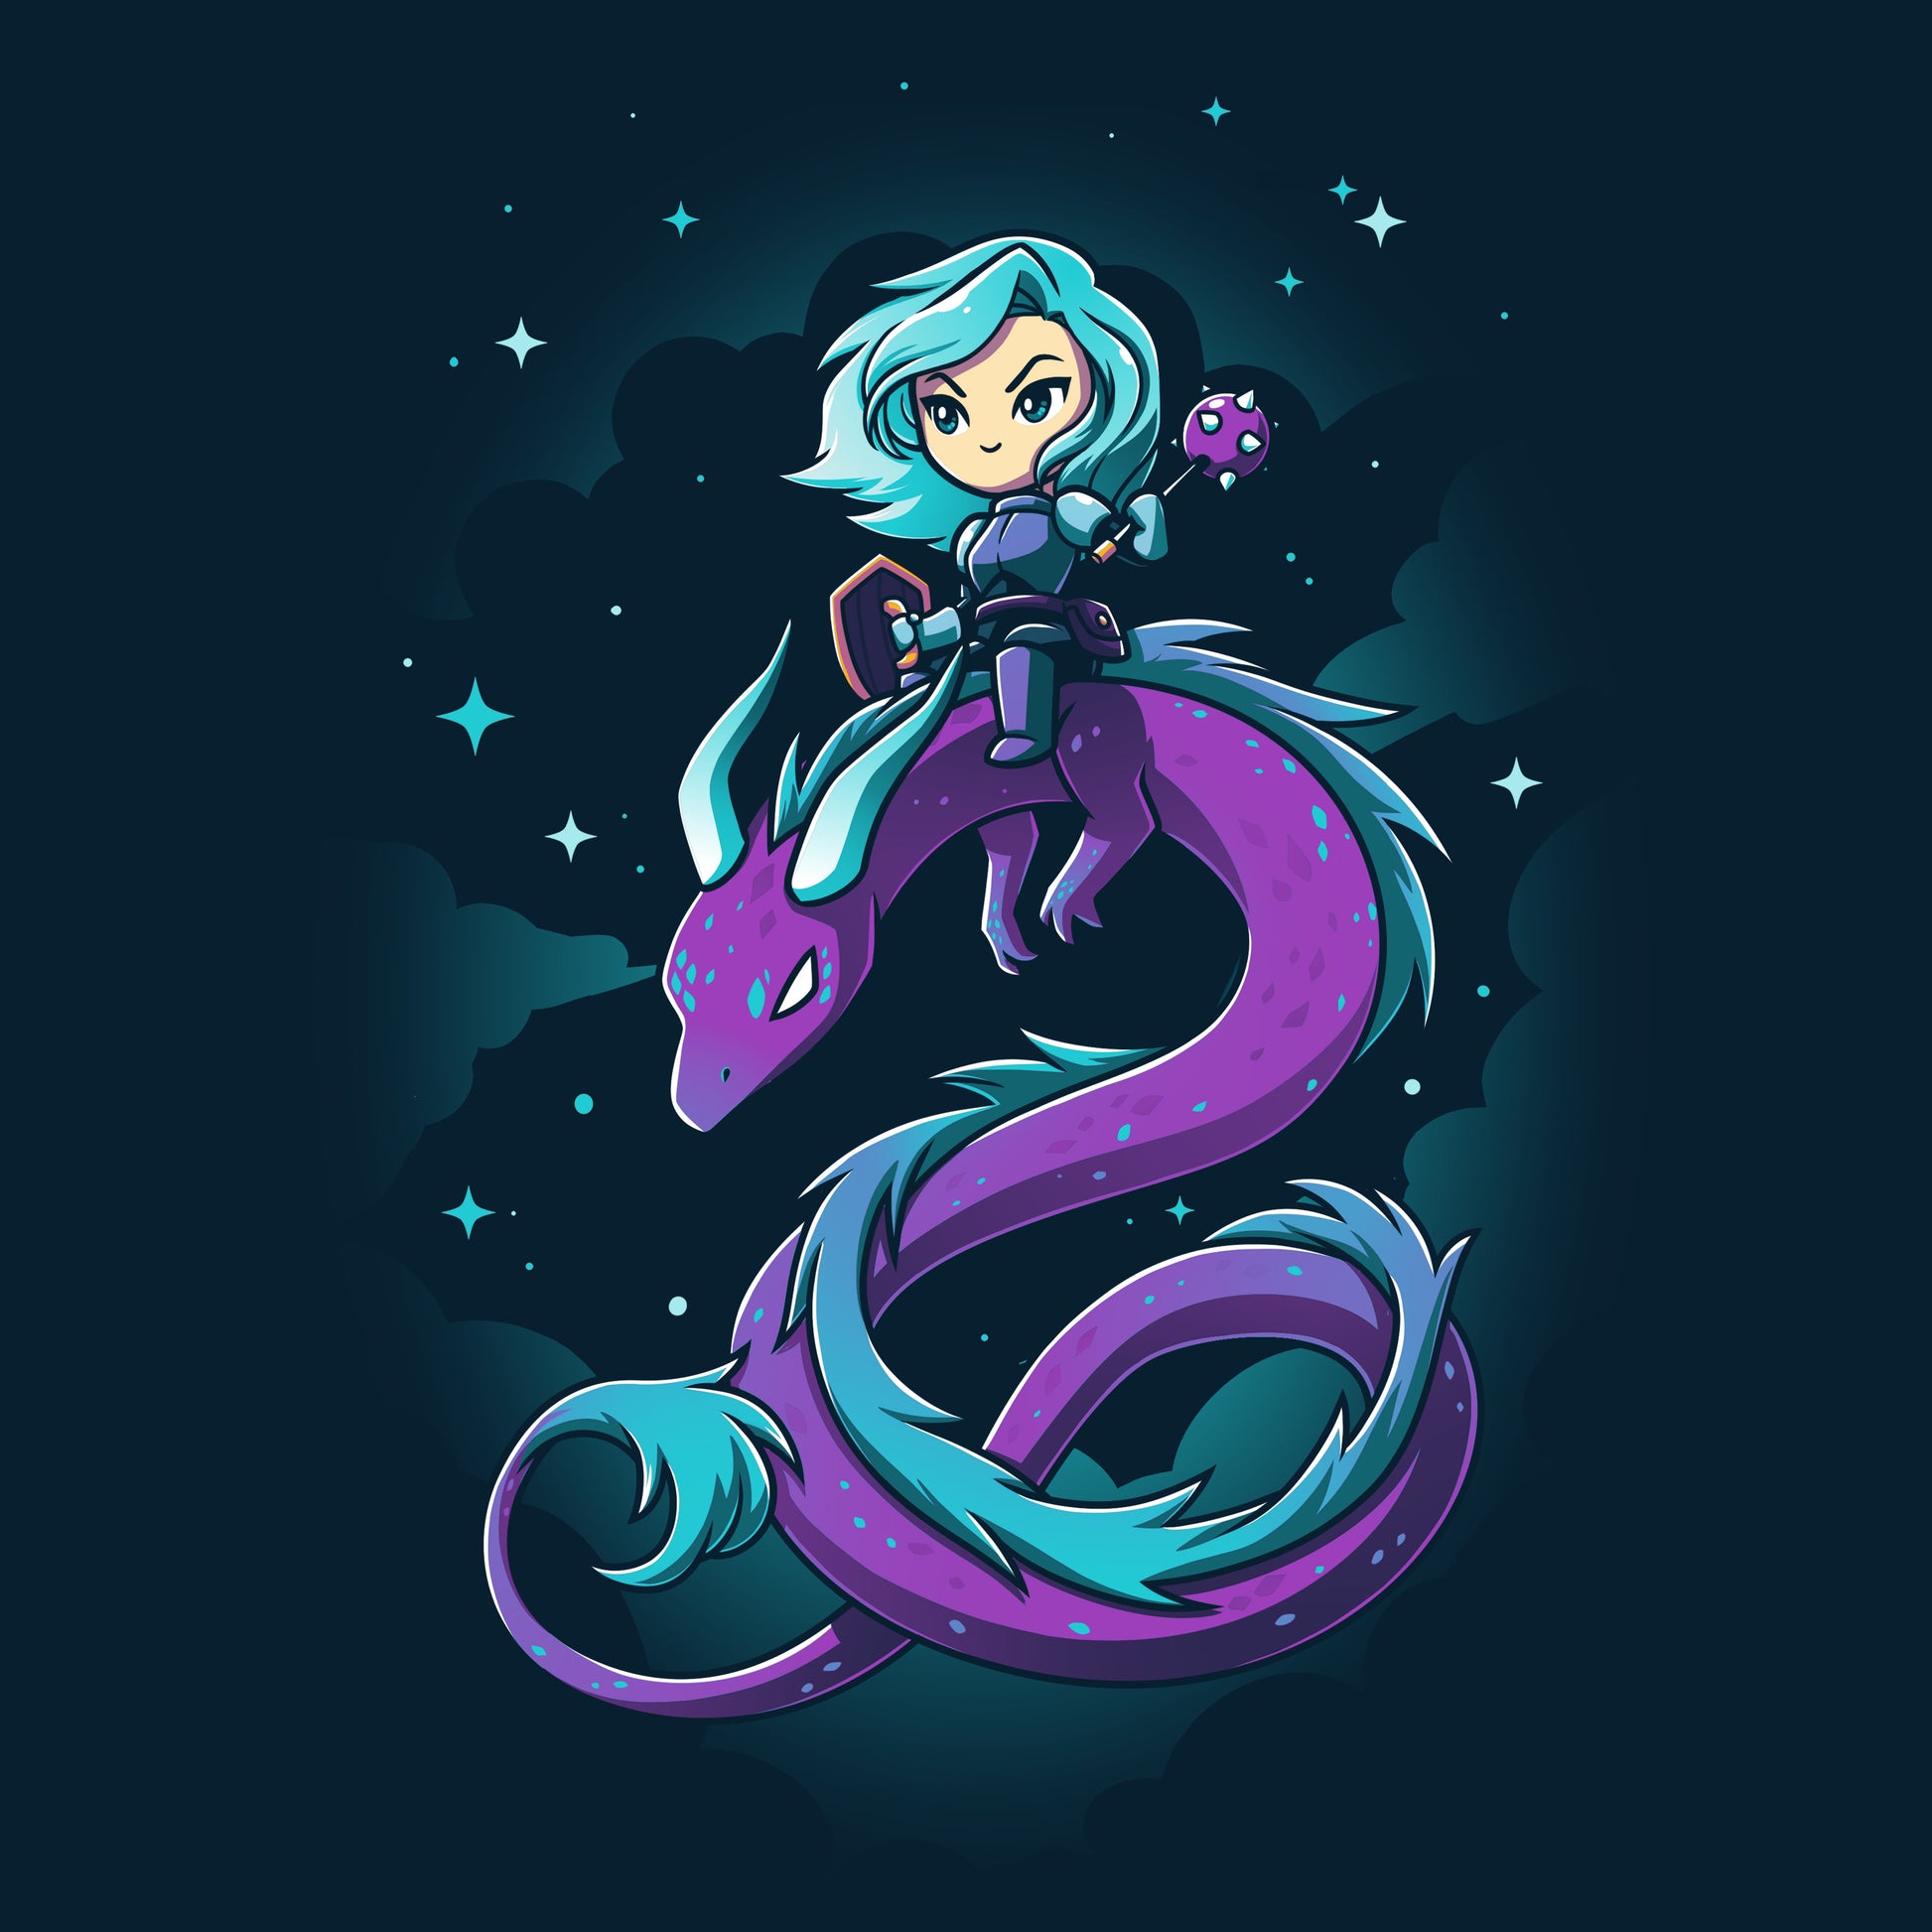 A girl riding a purple dragon in the night sky with a TeeTurtle Dragon Warrior shirt.